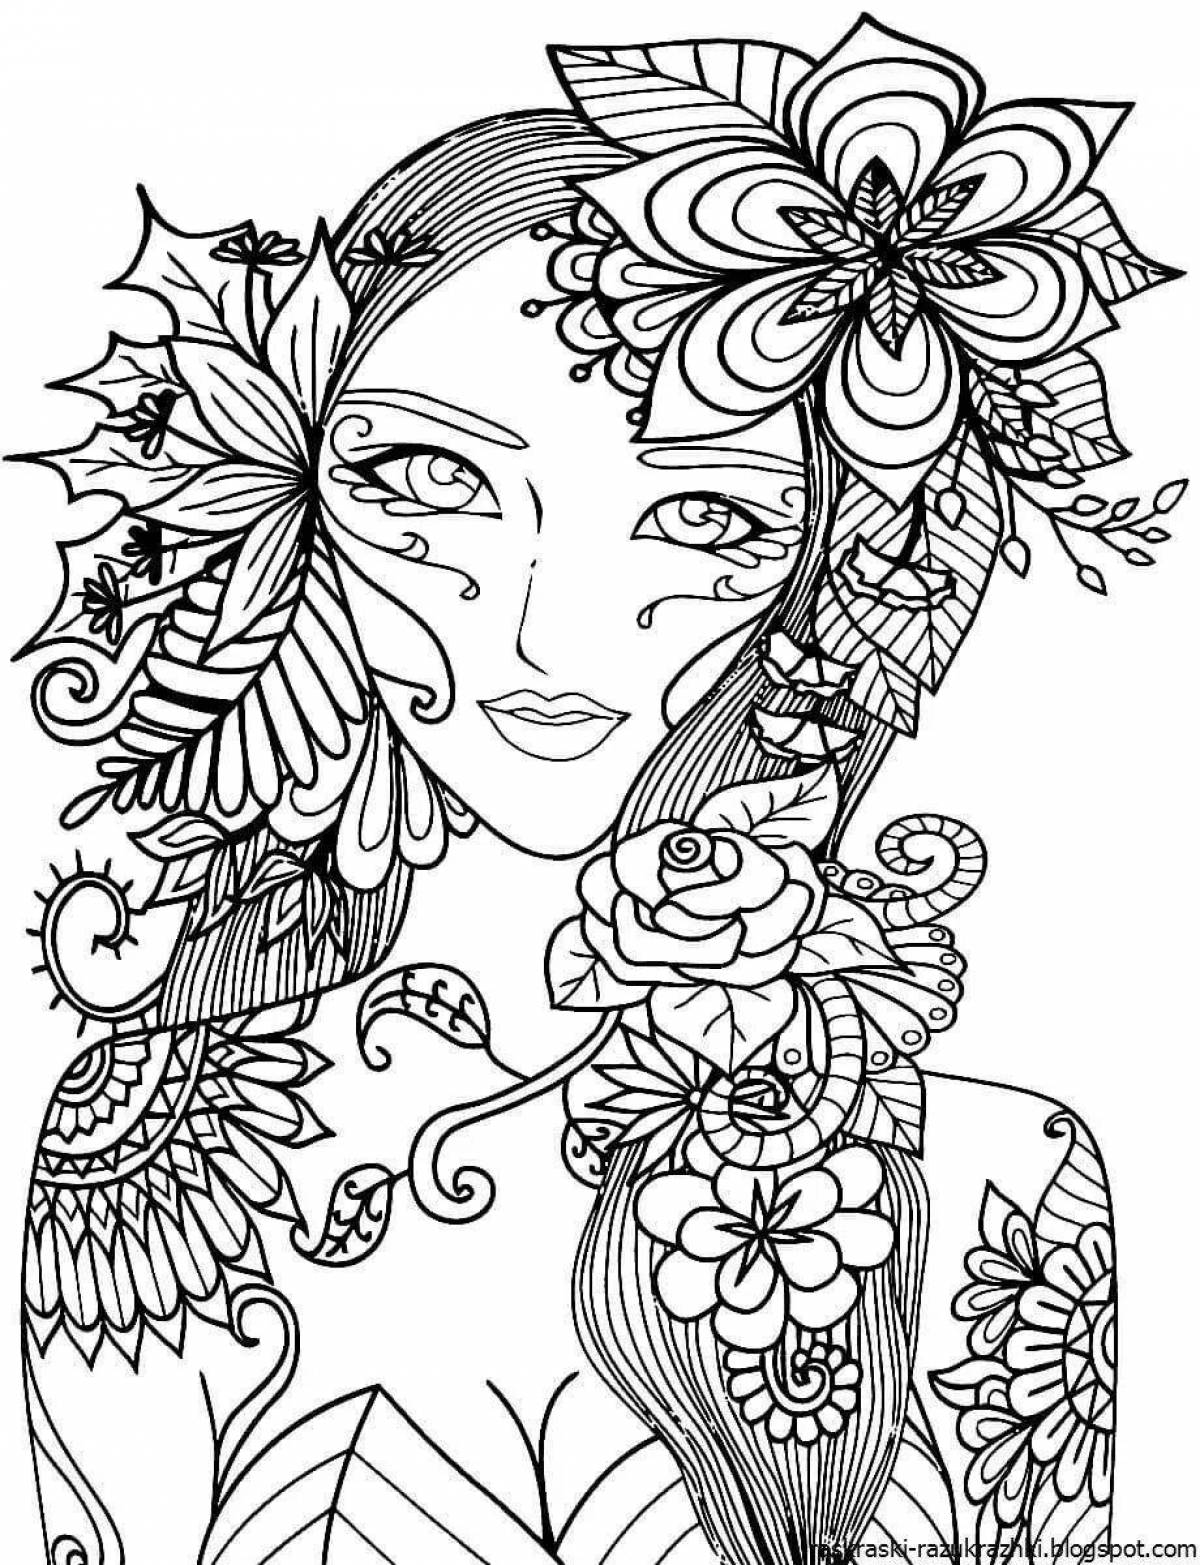 Exquisite complex coloring for girls